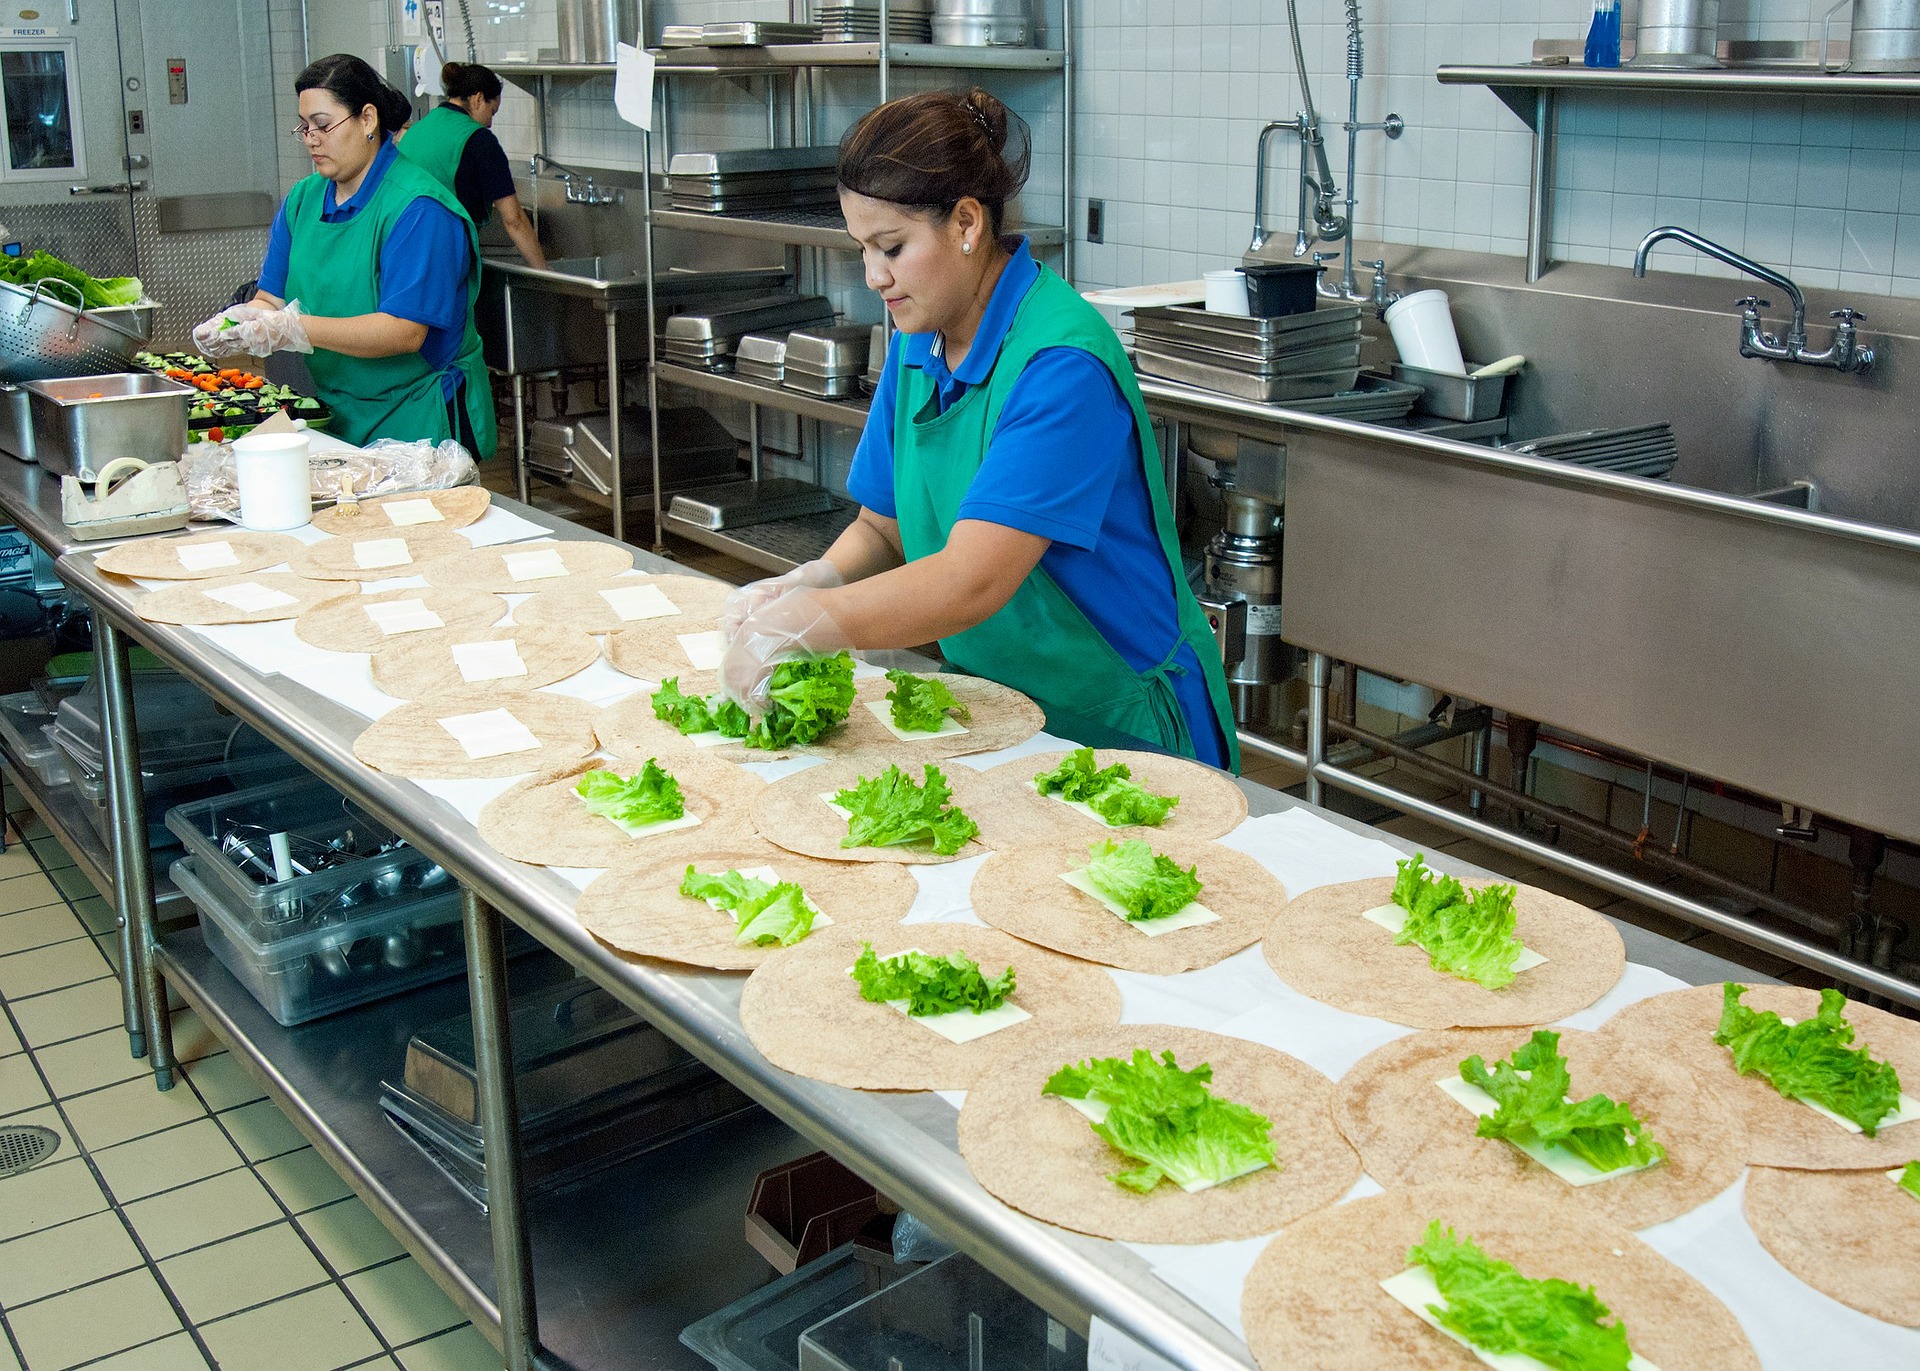 Employee Health is Critical to Food Safety